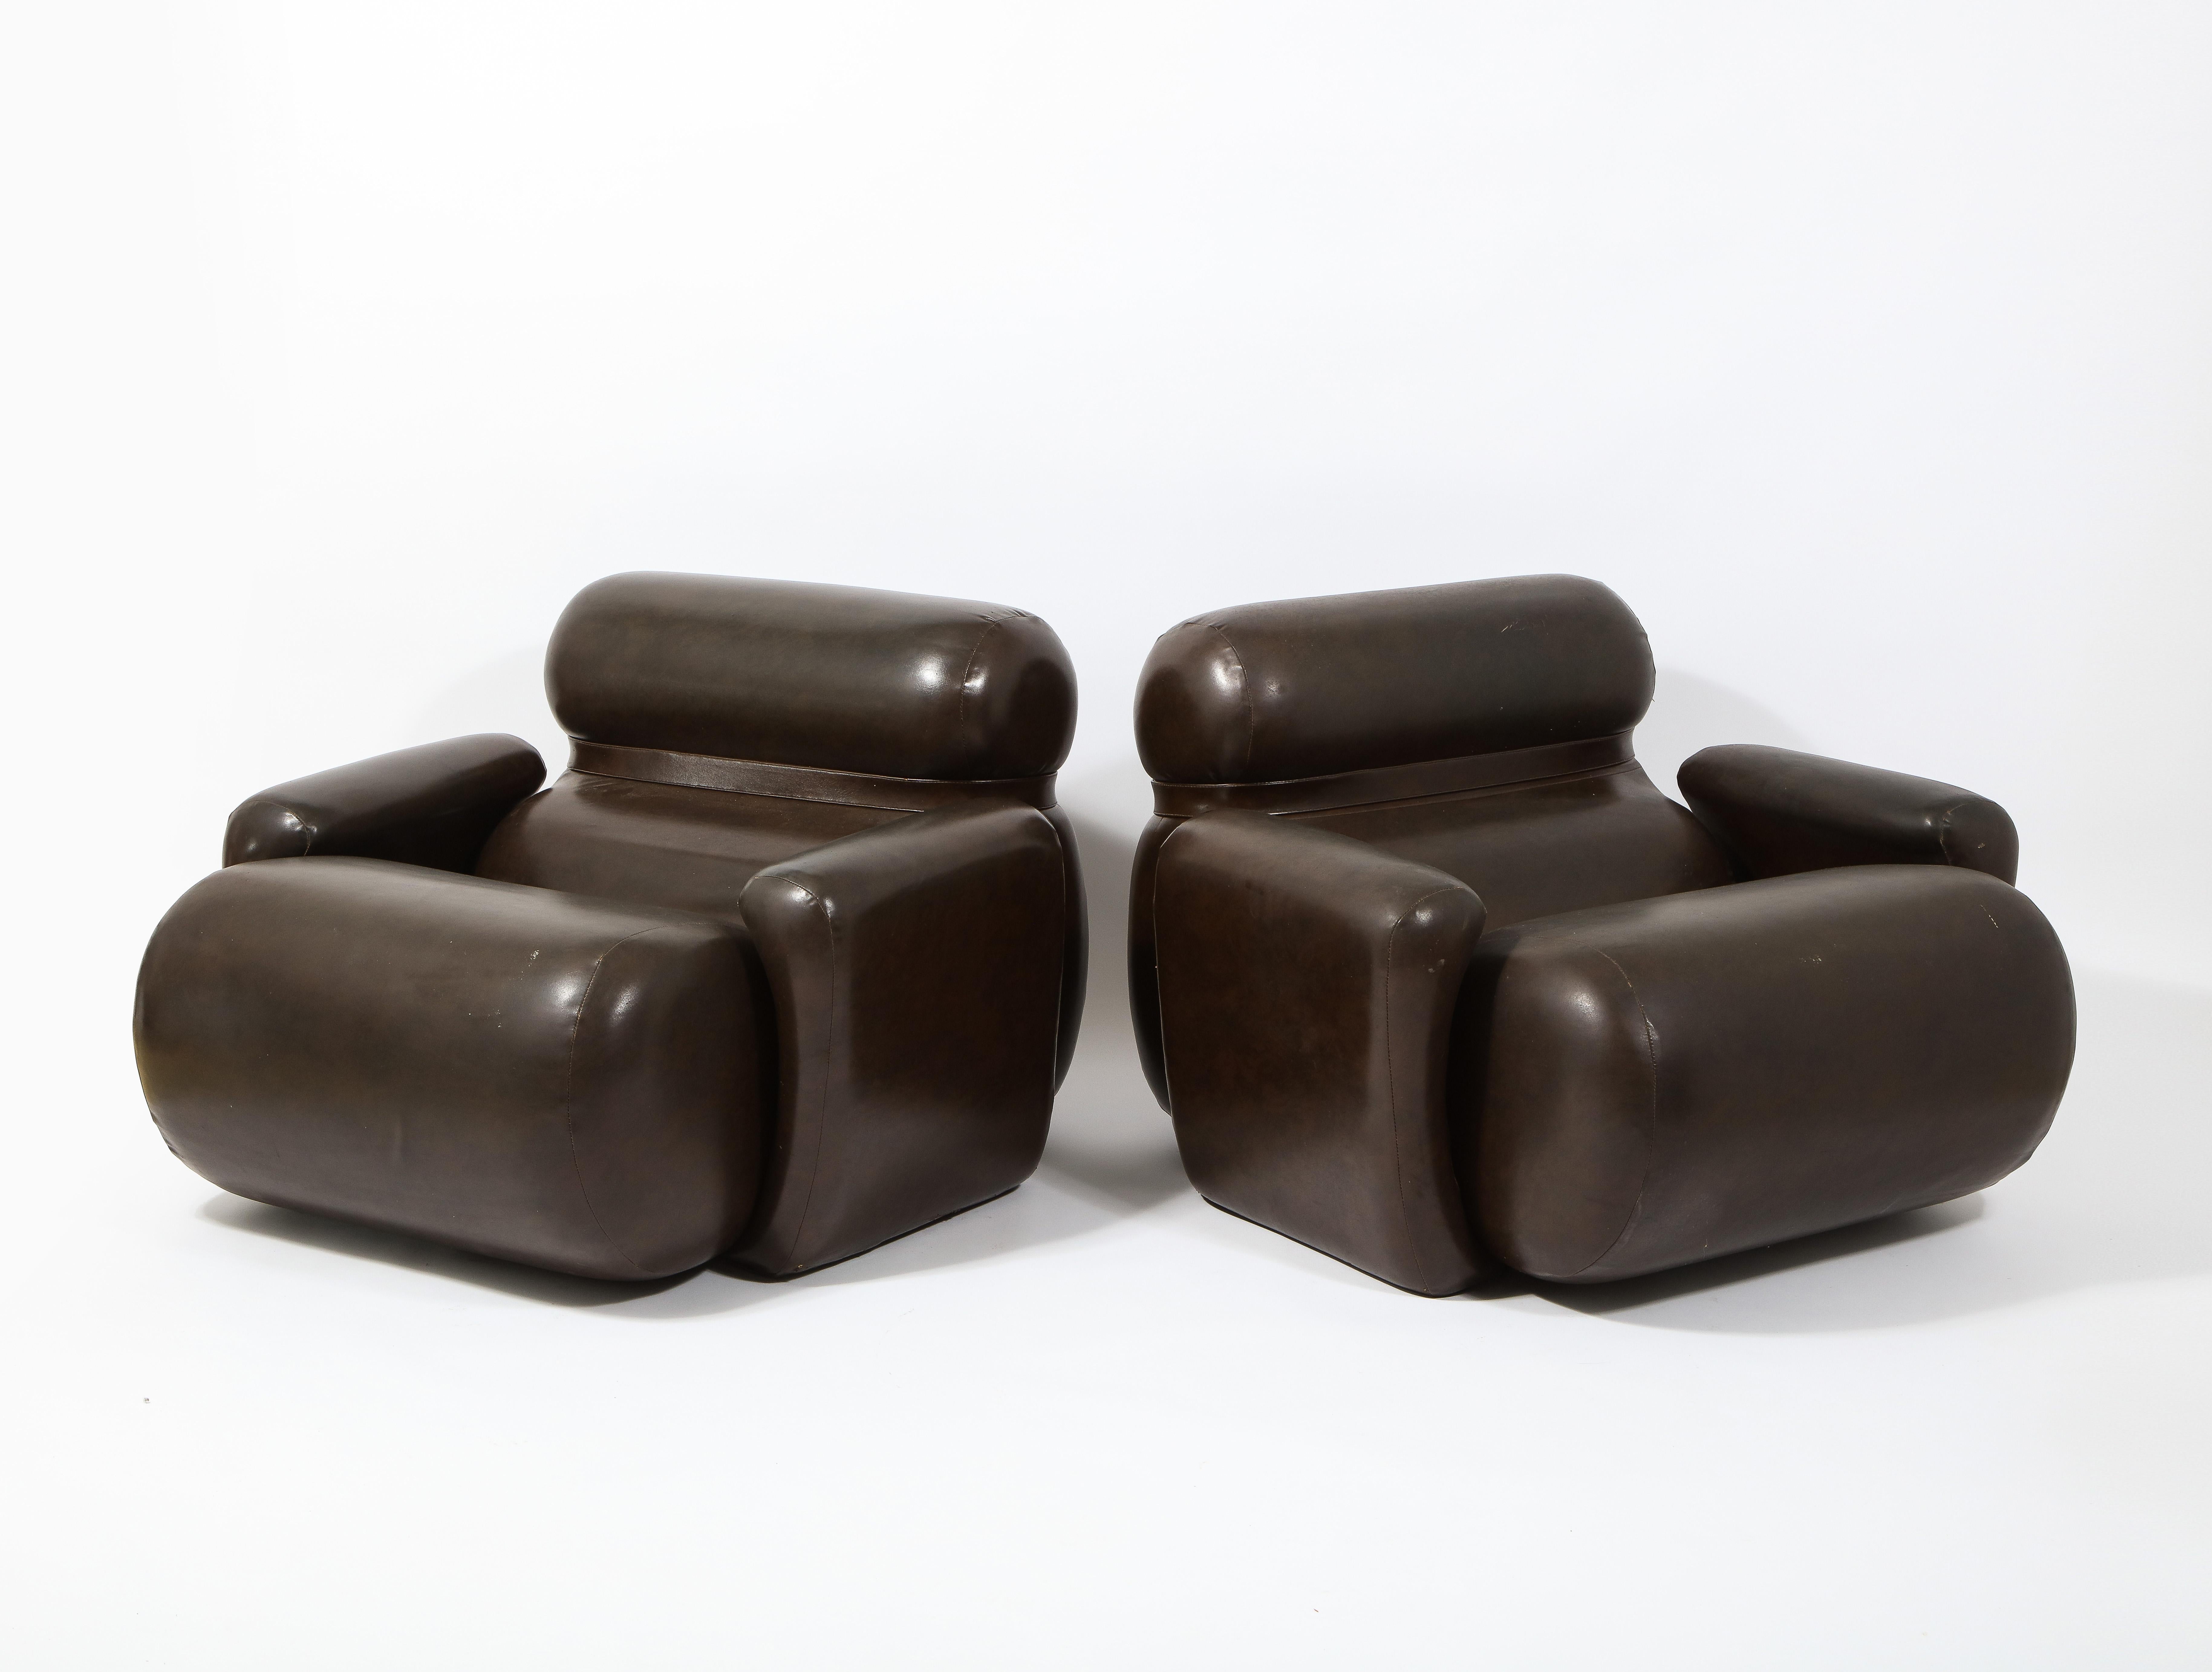 Upholstery Large Space Age Lounge Chair Armchairs in Dark Brown Vinyl, France 1970's For Sale